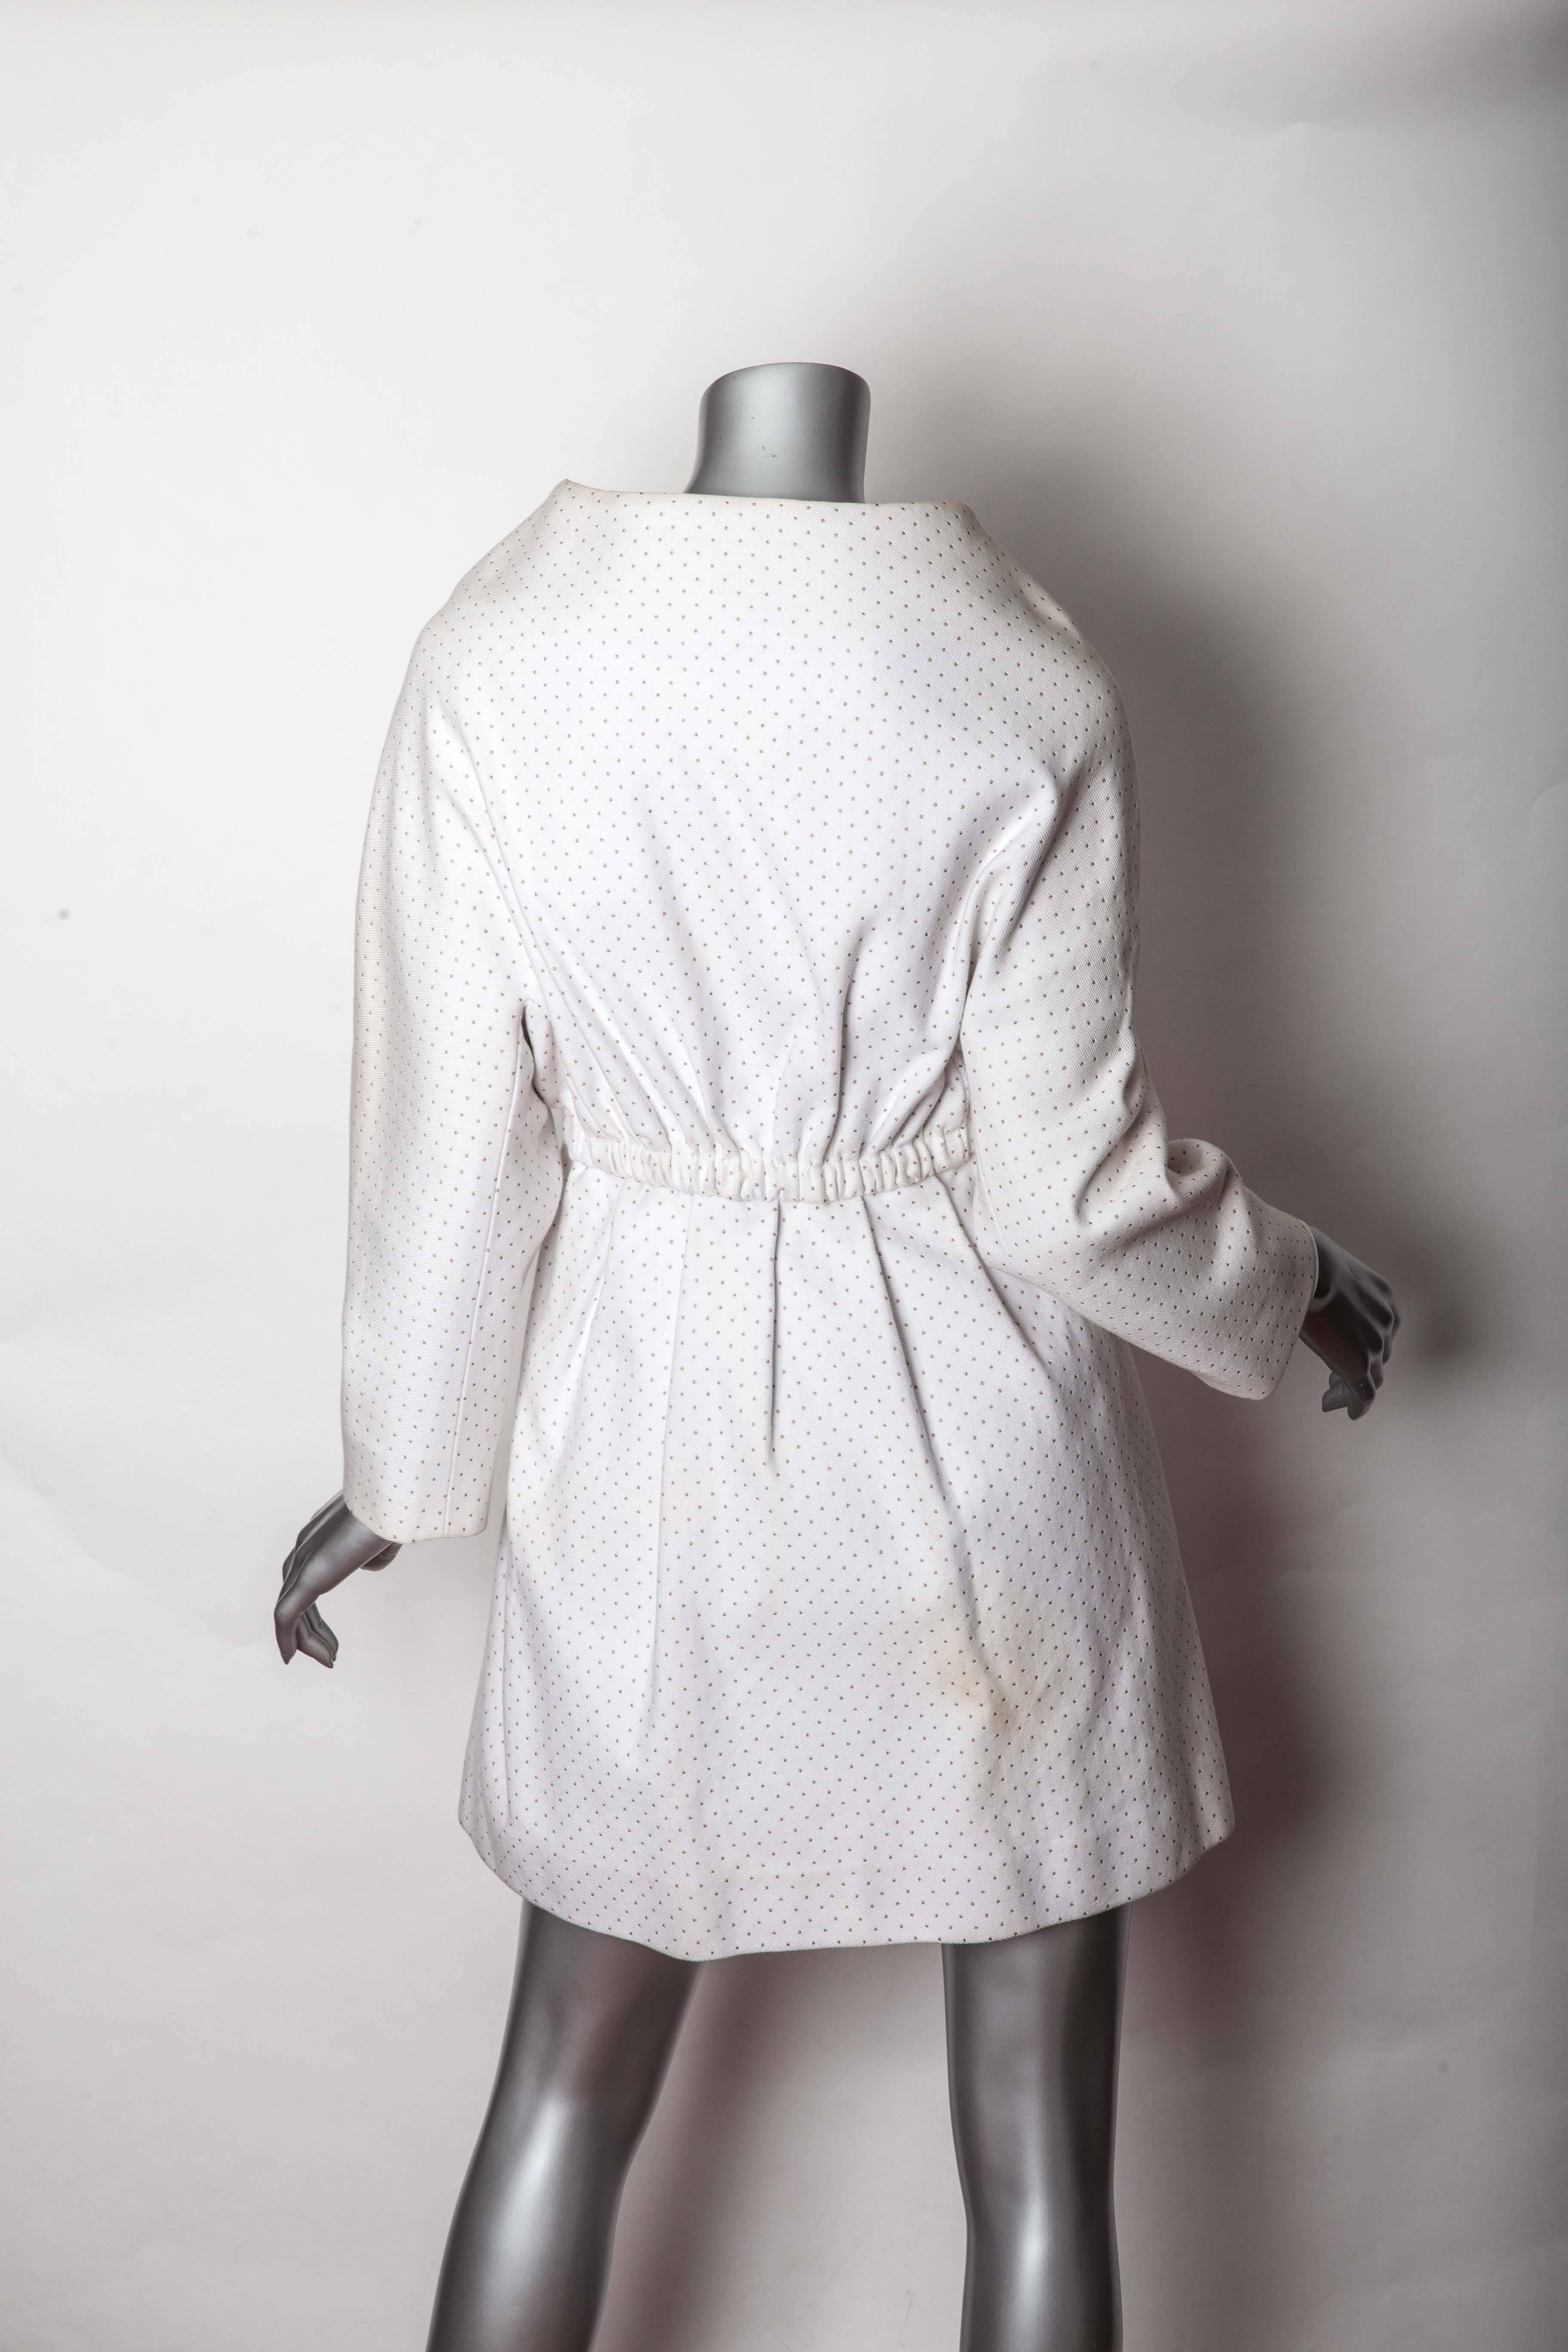 Stunning Vintage Nina Ricci White Coat in Needlecord Cotton. This coat is very sculptural and features an elasticized waist and a v neckline. There is an interior waist band that closes with a hook and eye that enhances the beautiful lines of this